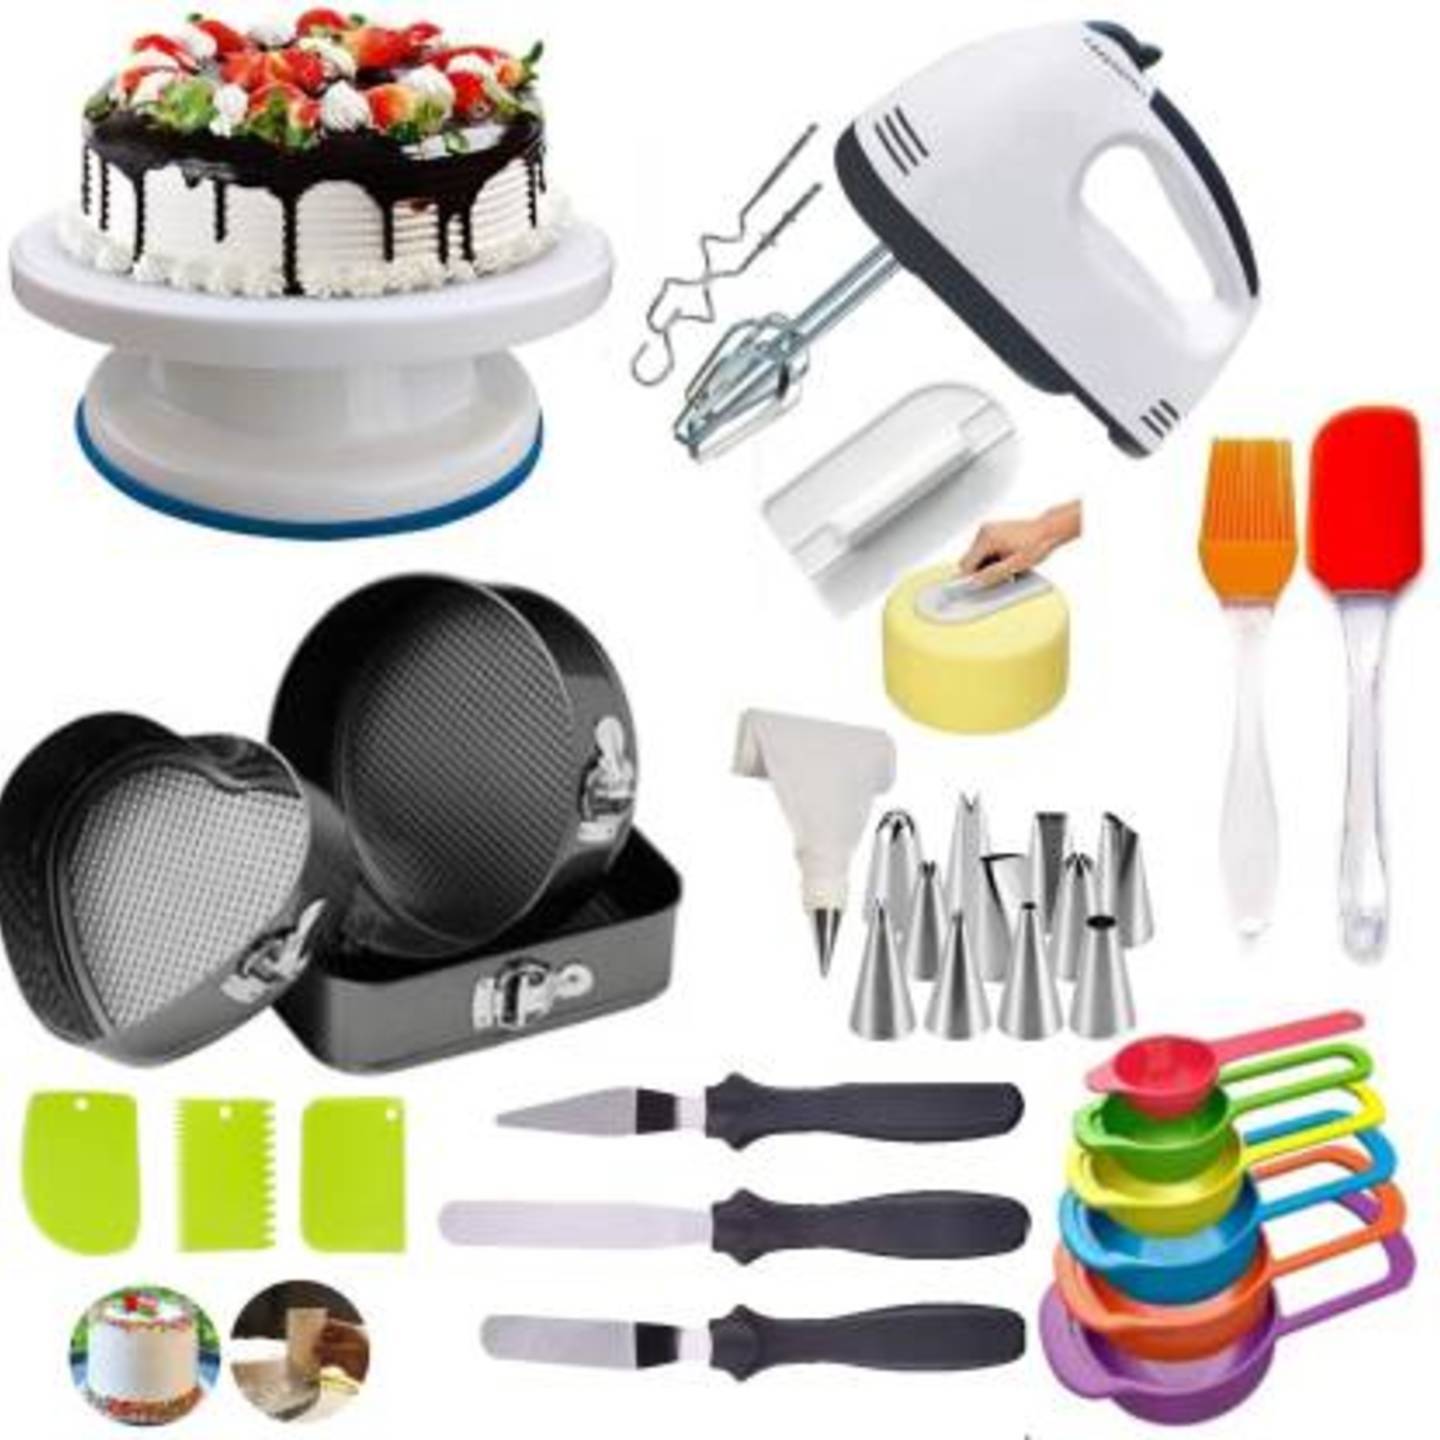 Cake Turn Table , knife, cake scrapper, MEASURING CUP, NOZZLE, CAKE DECORATION ITEM, electric blender,spatula